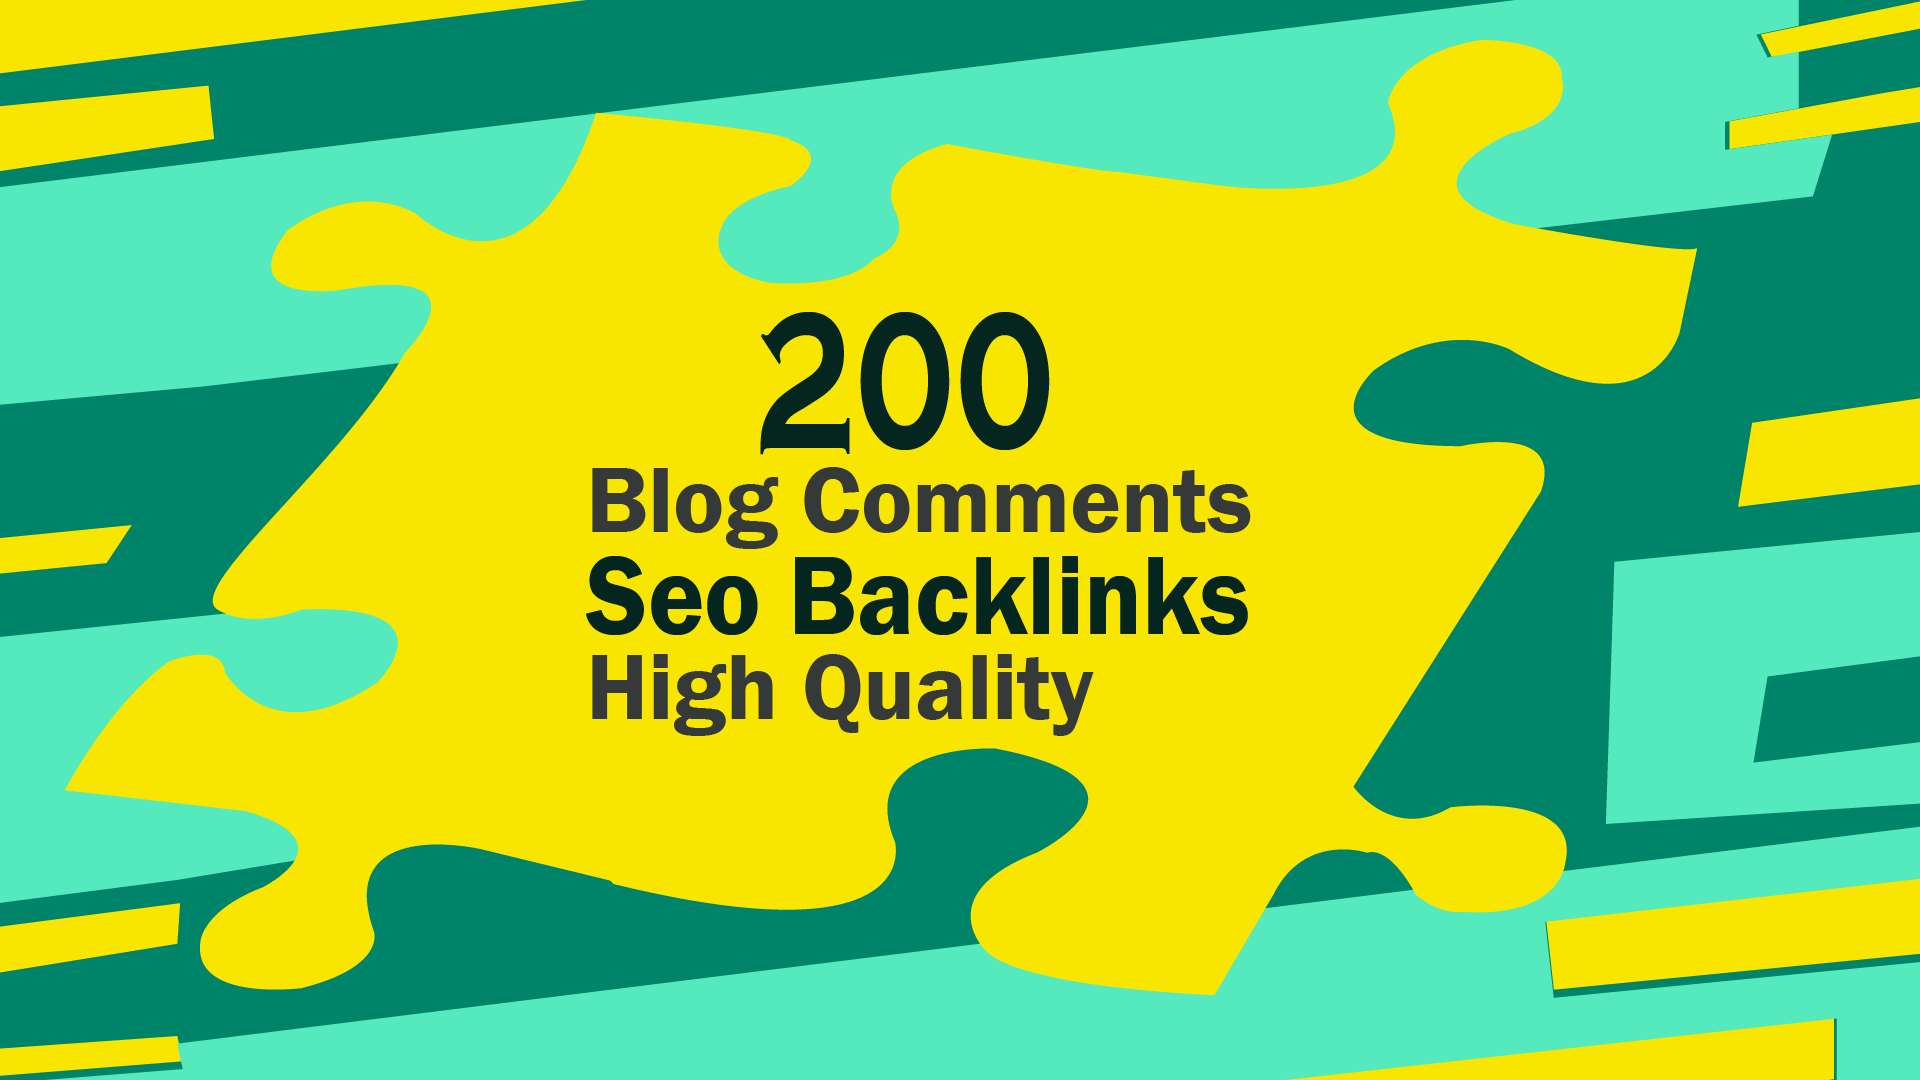 Make 200 Blog Comment With High Quality Backlinks